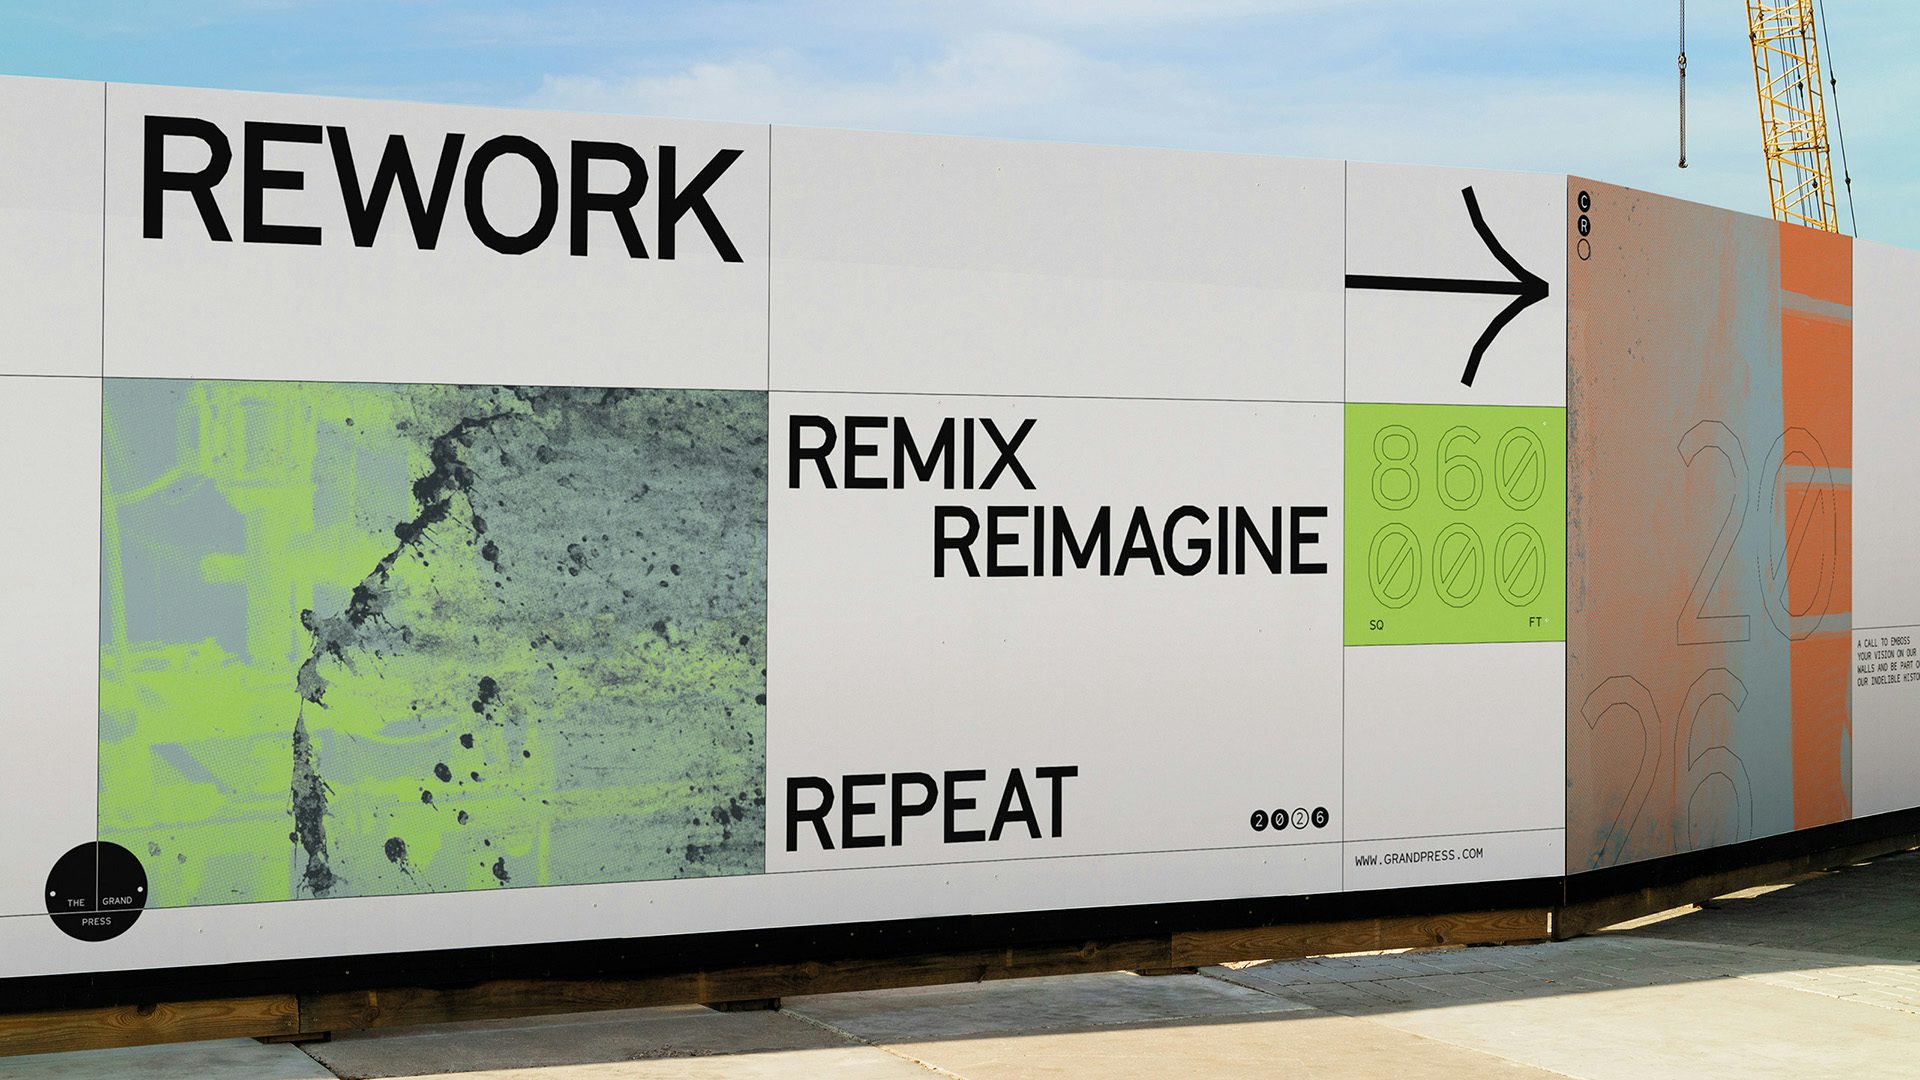 Image shows posters for the Grand Press, featuring the phrases 'rework, remix, reimagine, repeat' staggered around the design, and an arrow pointing to the right